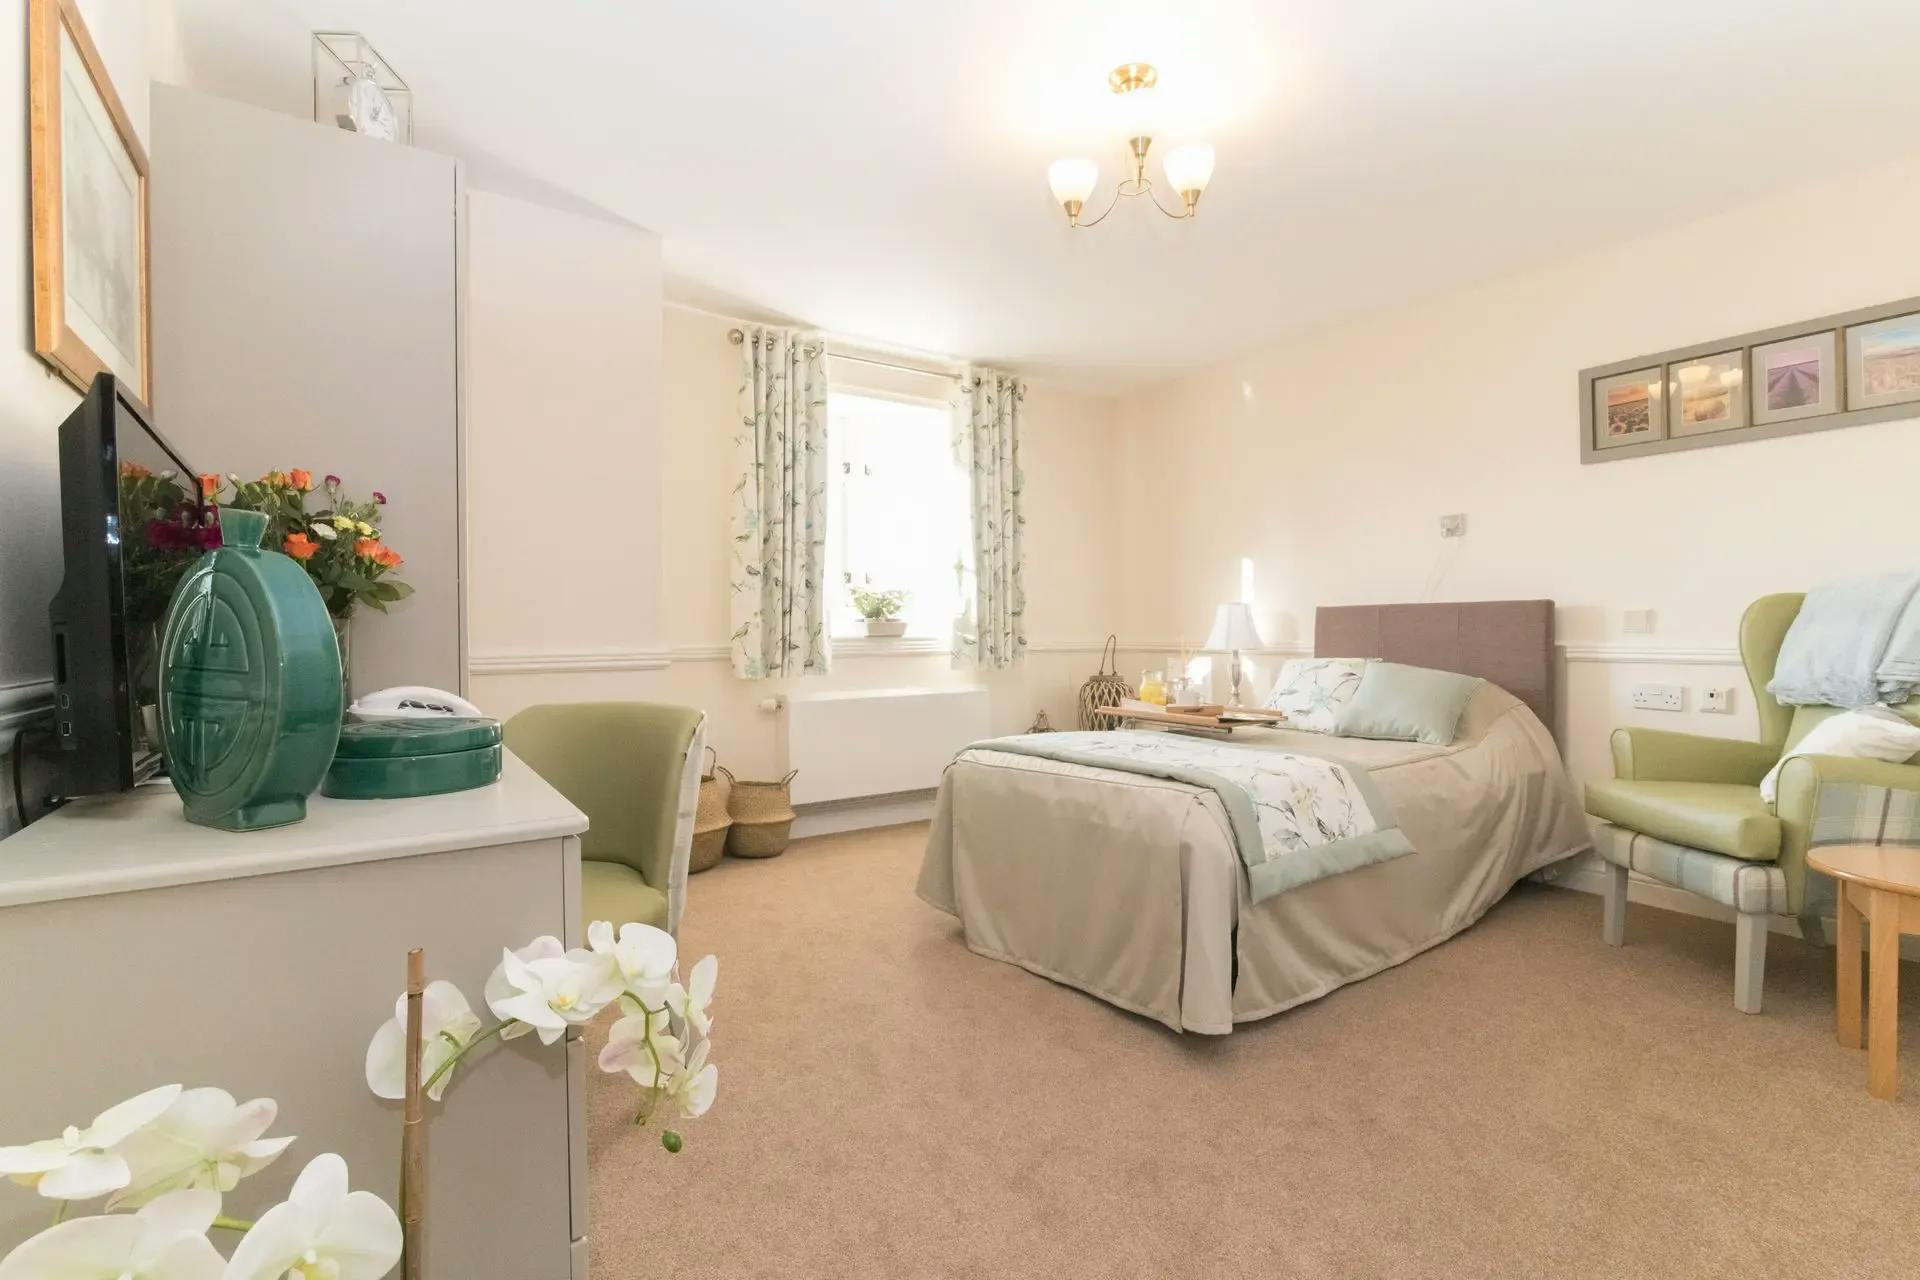 BEdroom of Mill house care home in Chipping Campden